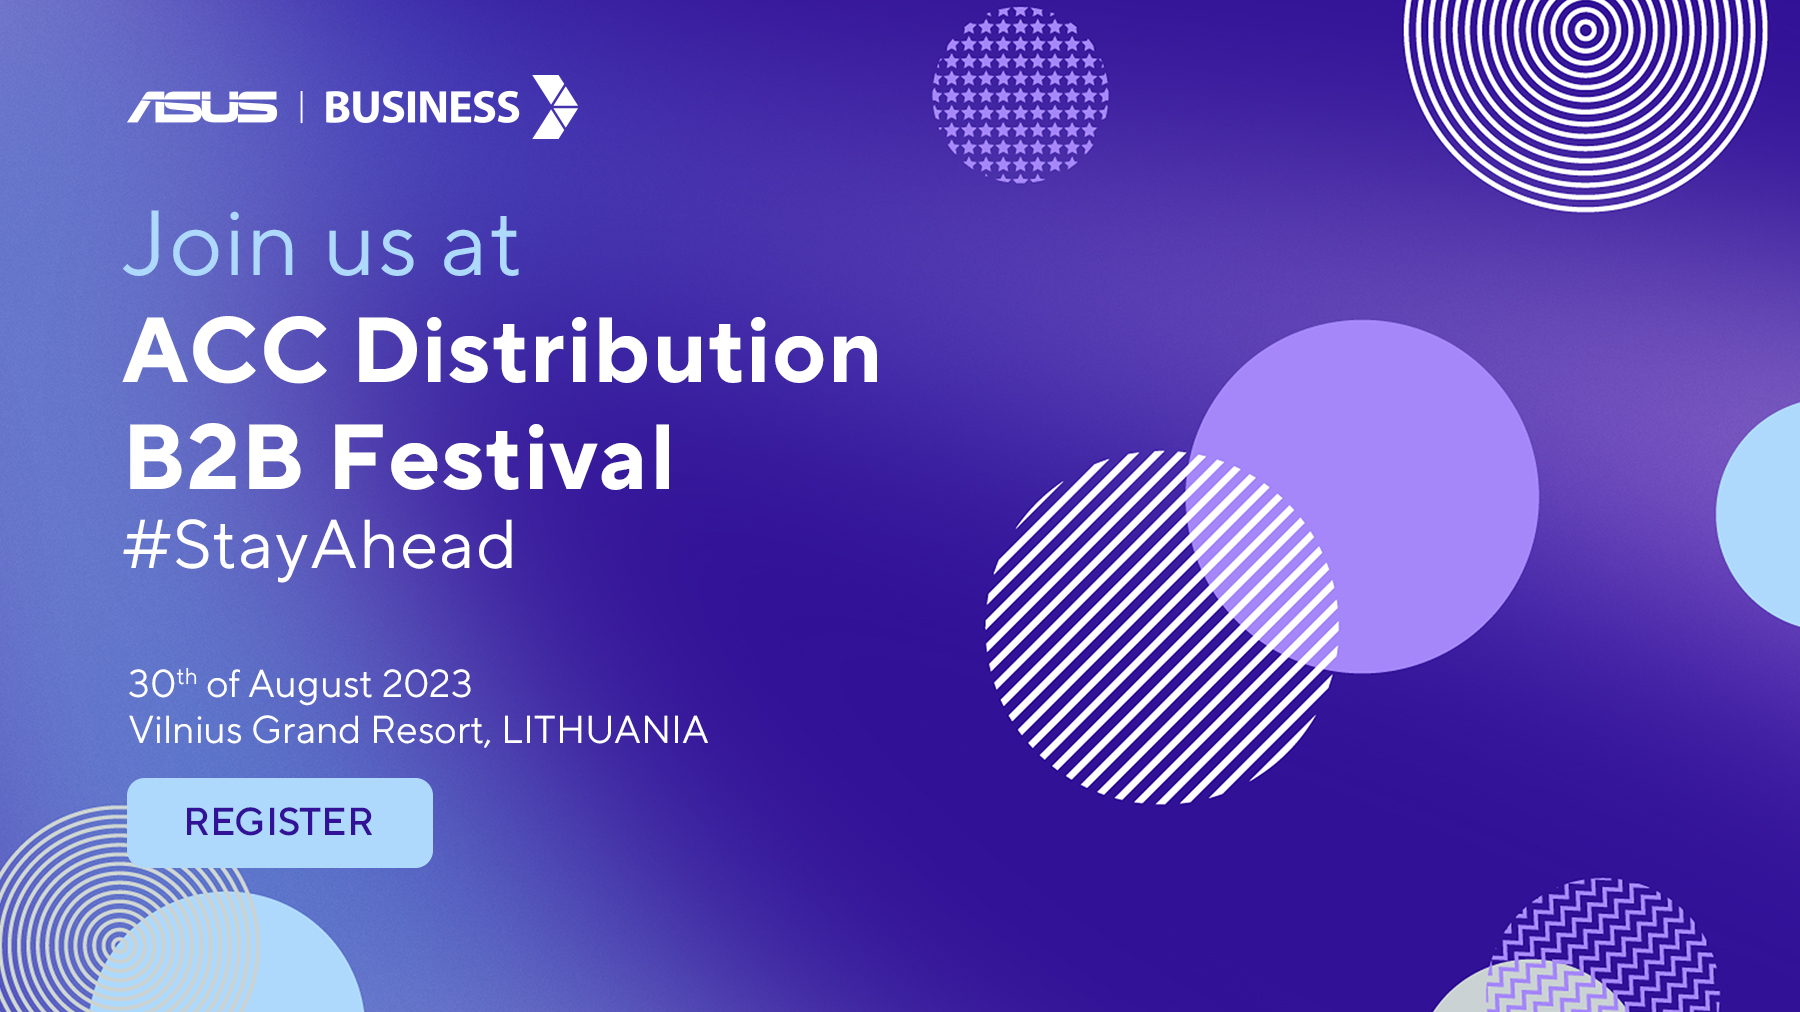 Welcome to join ASUS Business at ACC B2B Festival #StayAhead